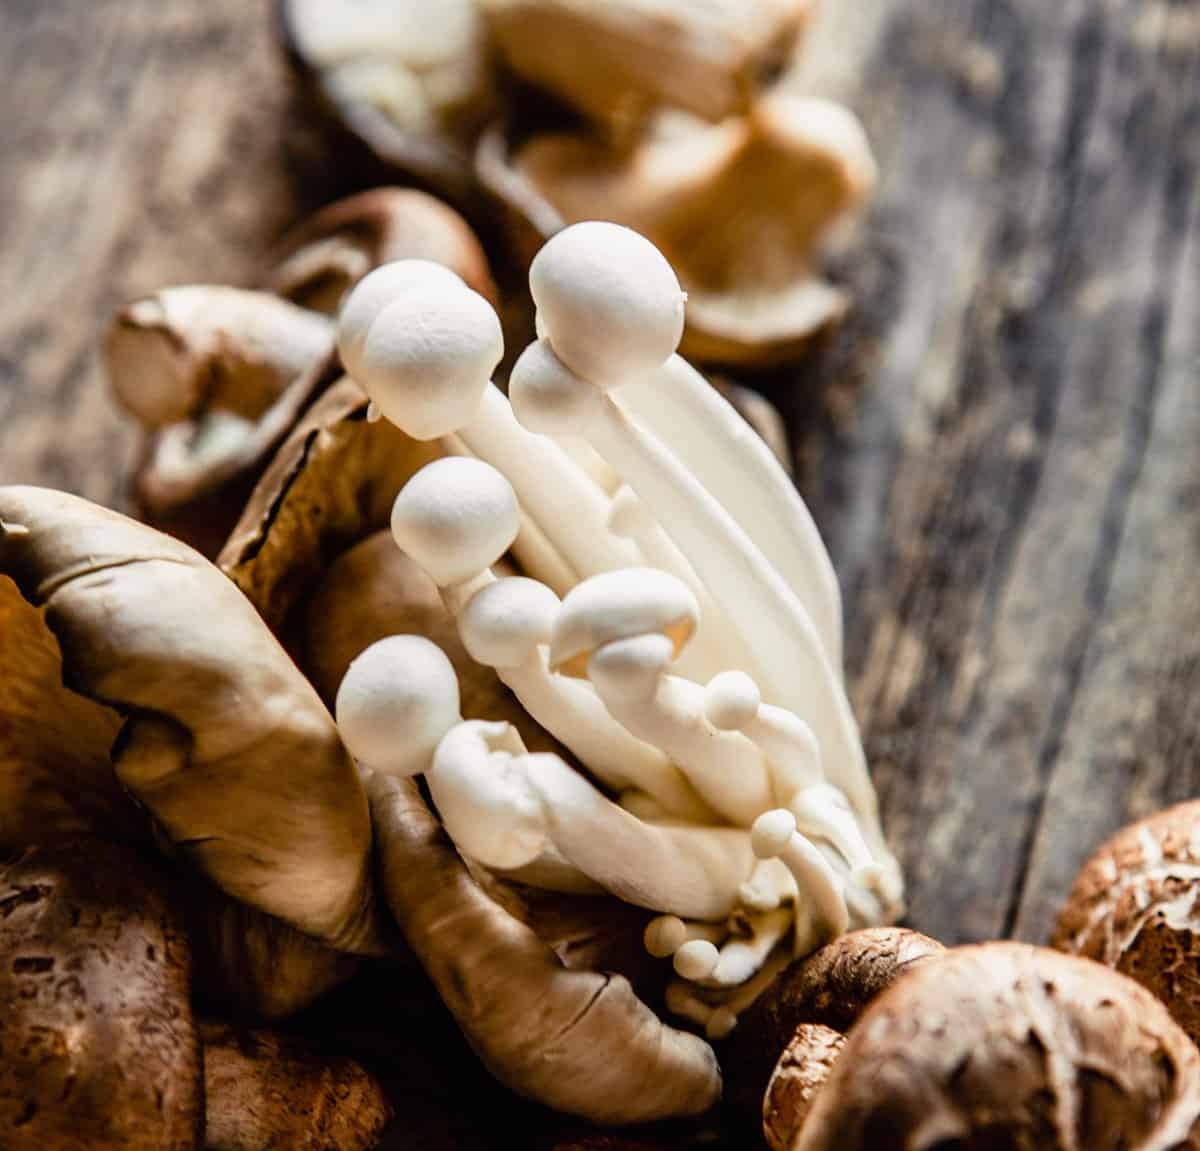 Close up image of white beech mushrooms on top of a pile of mushrooms on a wood board